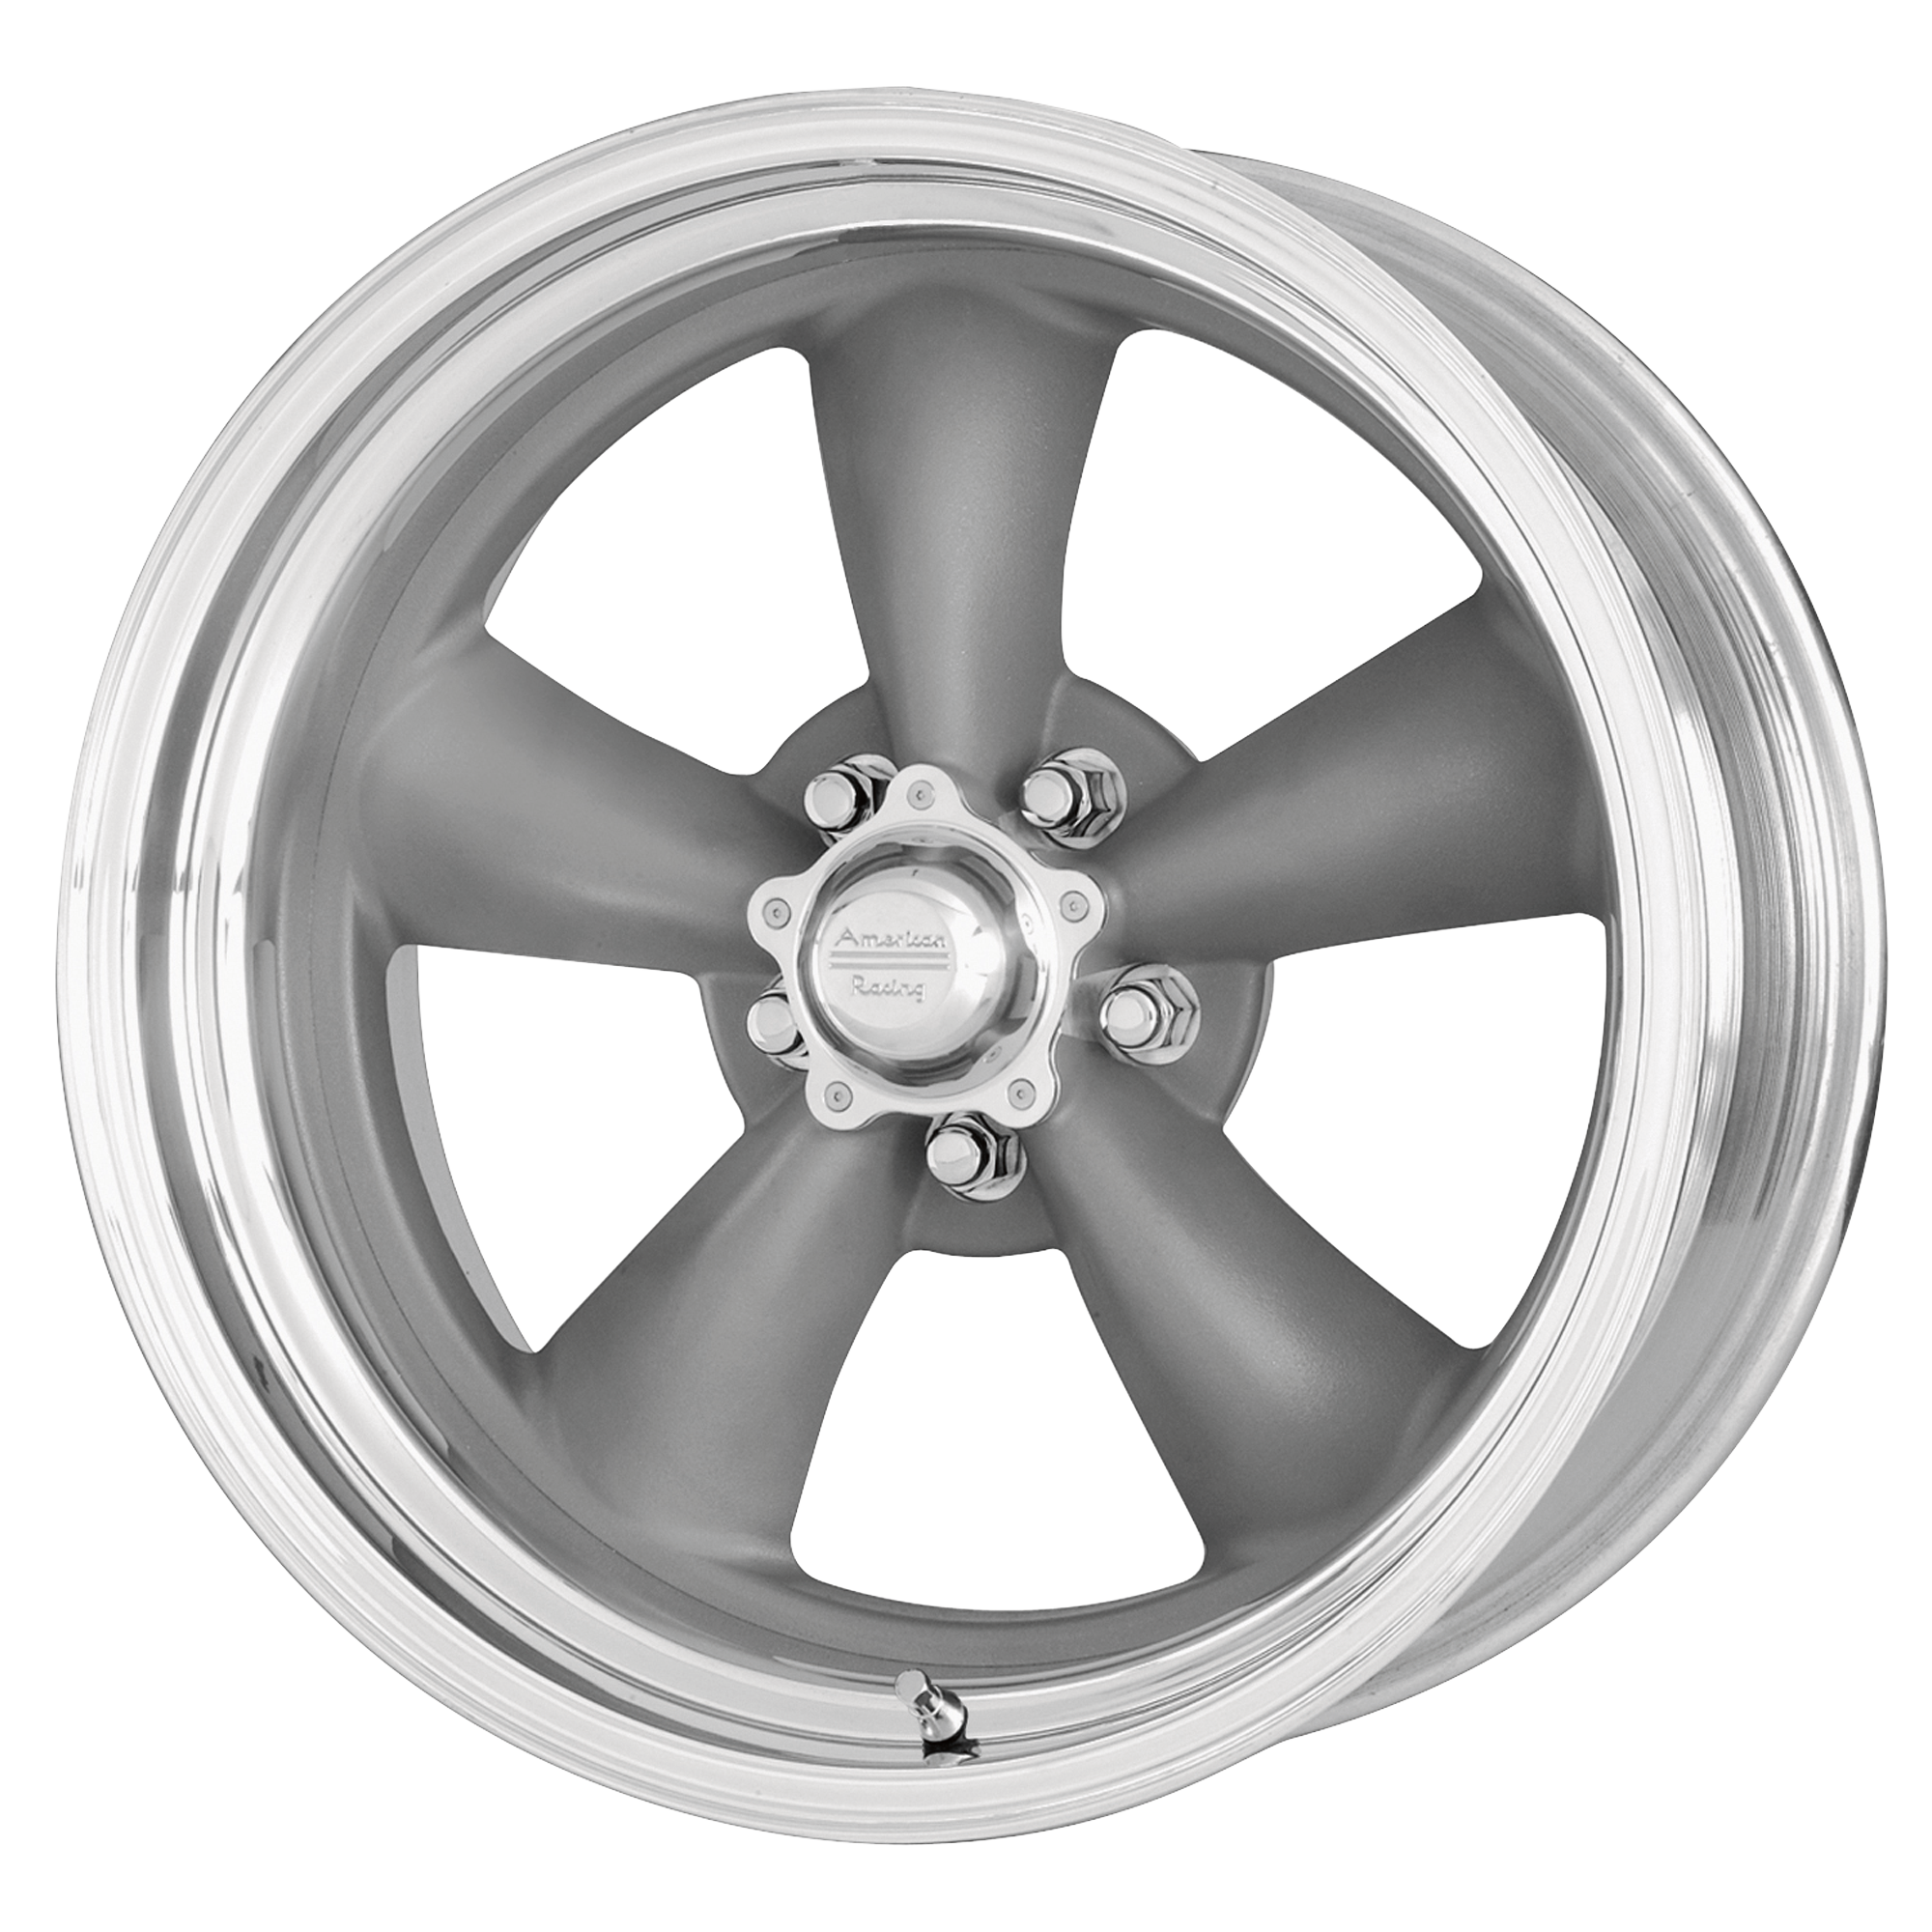 CLASSIC TORQ THRUST II ONE PIECE 17x7 5x114.30 MAG GRAY W/ MACHINED LIP (0 mm) - Tires and Engine Performance